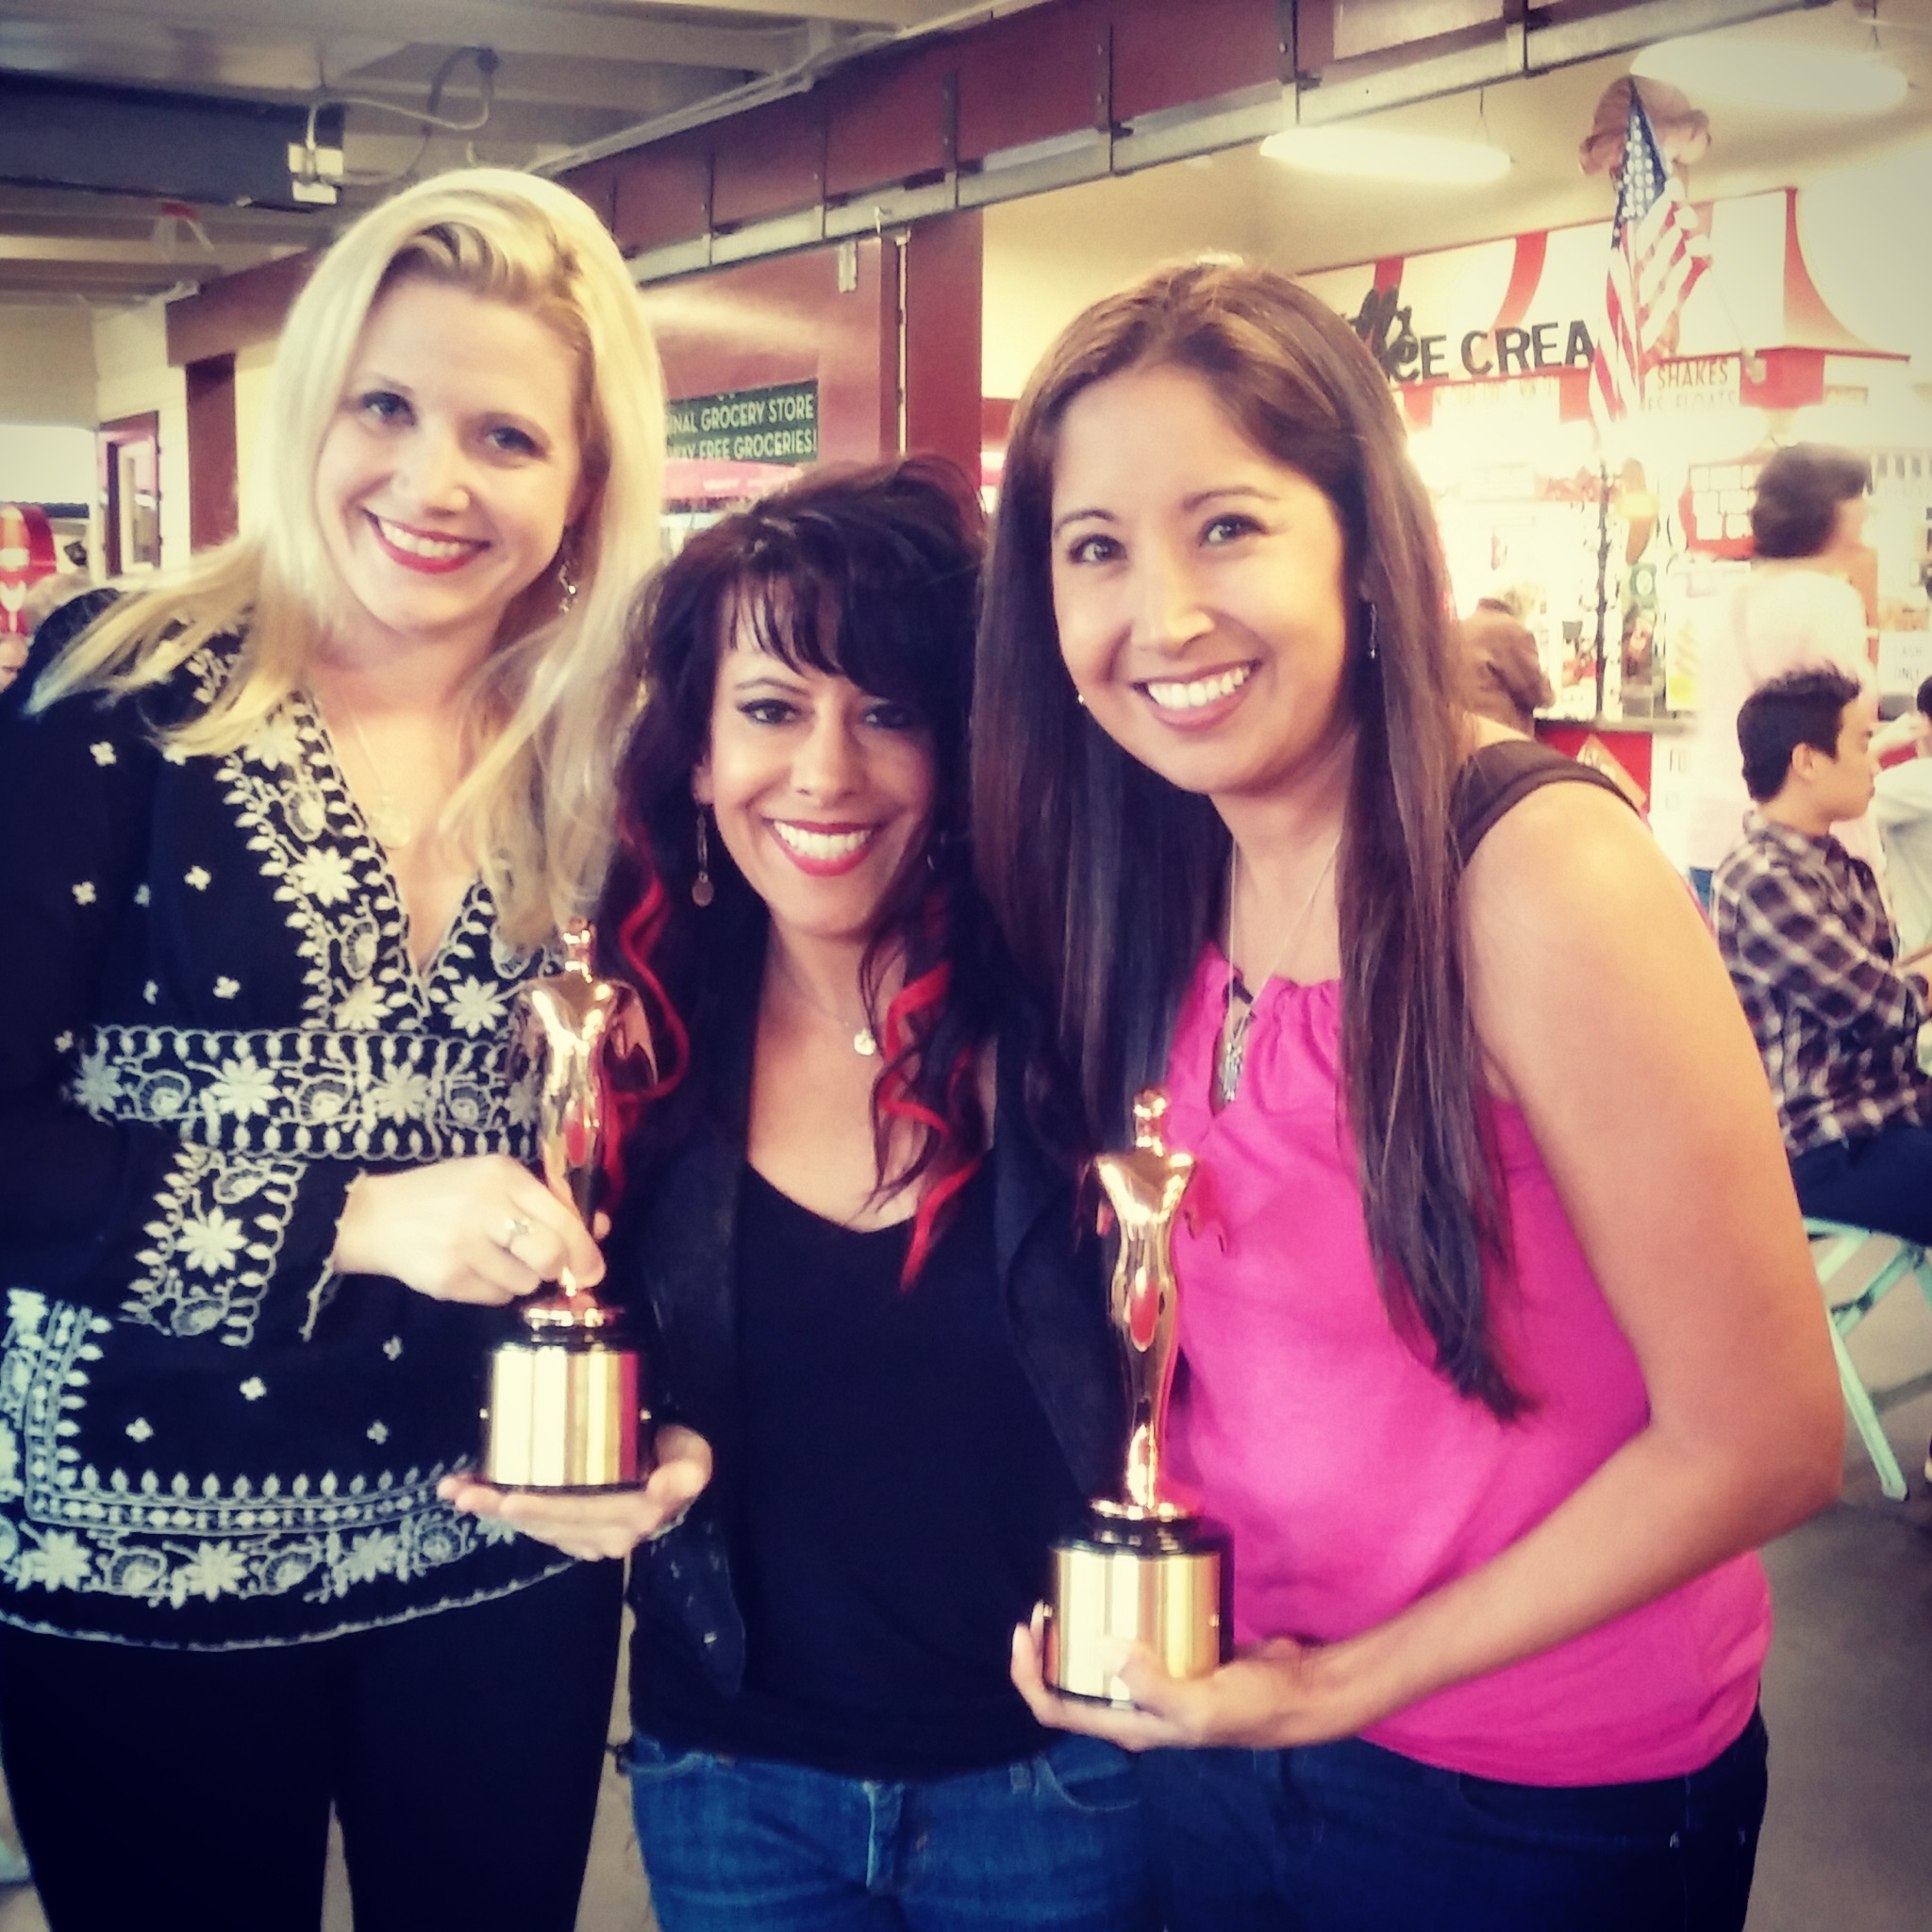 Misty's music video, Panic Button, is a 2 time Telly Award winner. Pictured here with her close friends, Amanda & Stephanie. They helped her begin the journey with a pre-production meeting right at this very spot! The Farmer's Market in Hollywood.